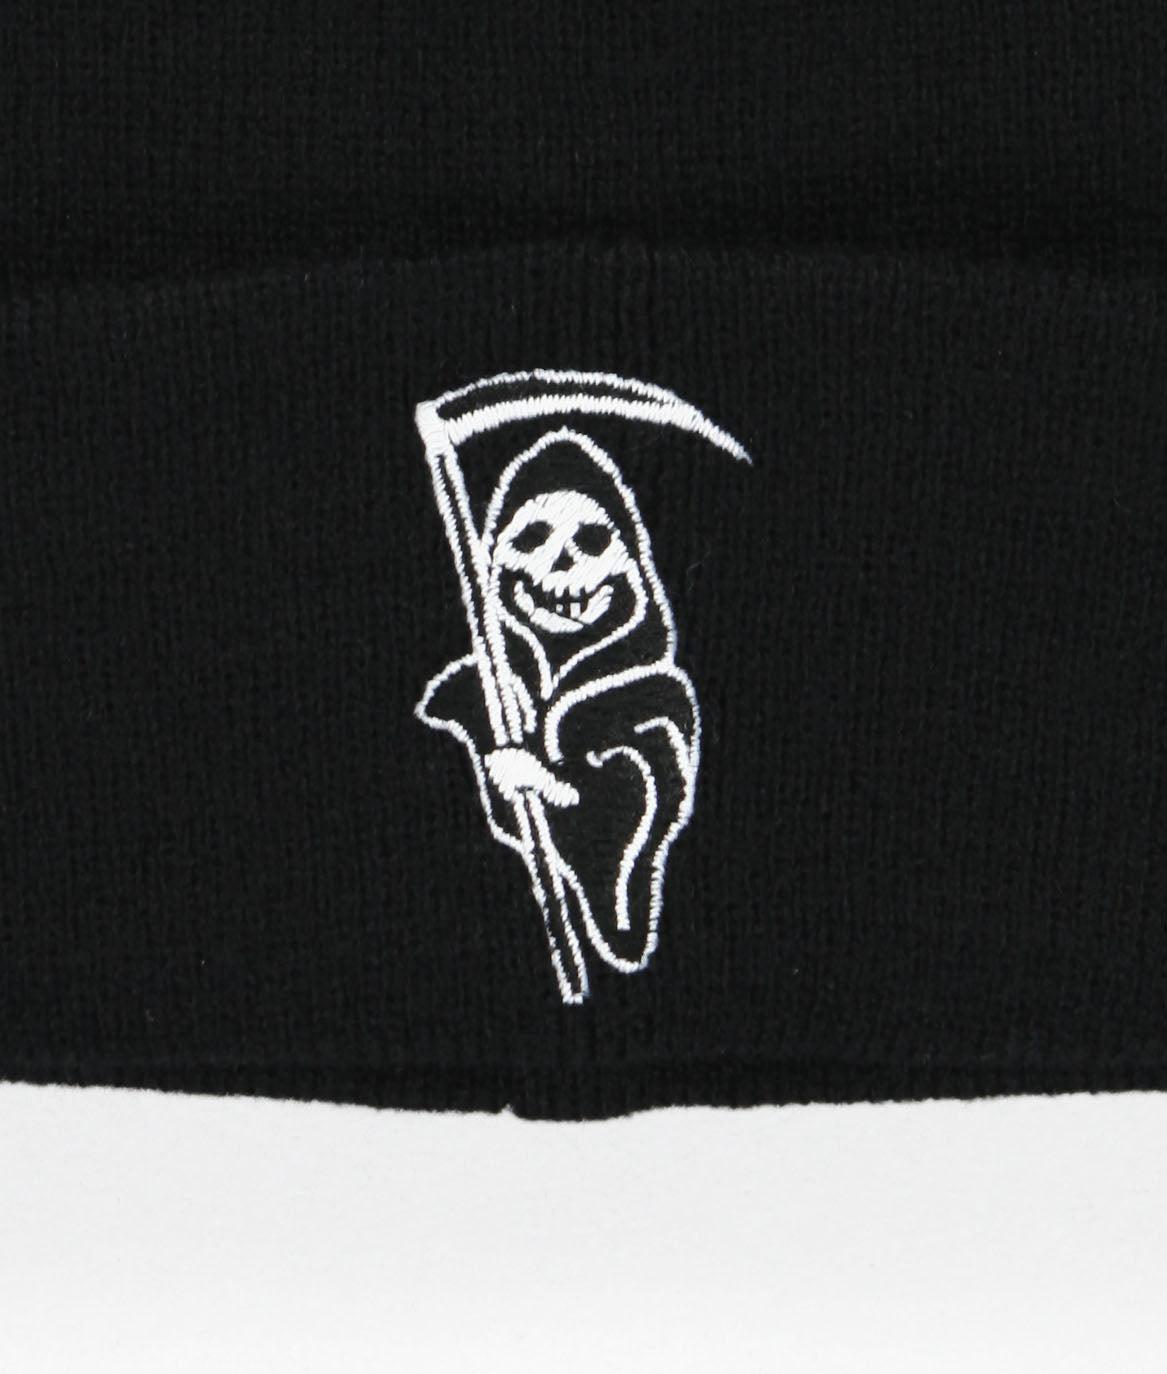 Reaper Embroidered Womens Beanie - OS - Riot Society